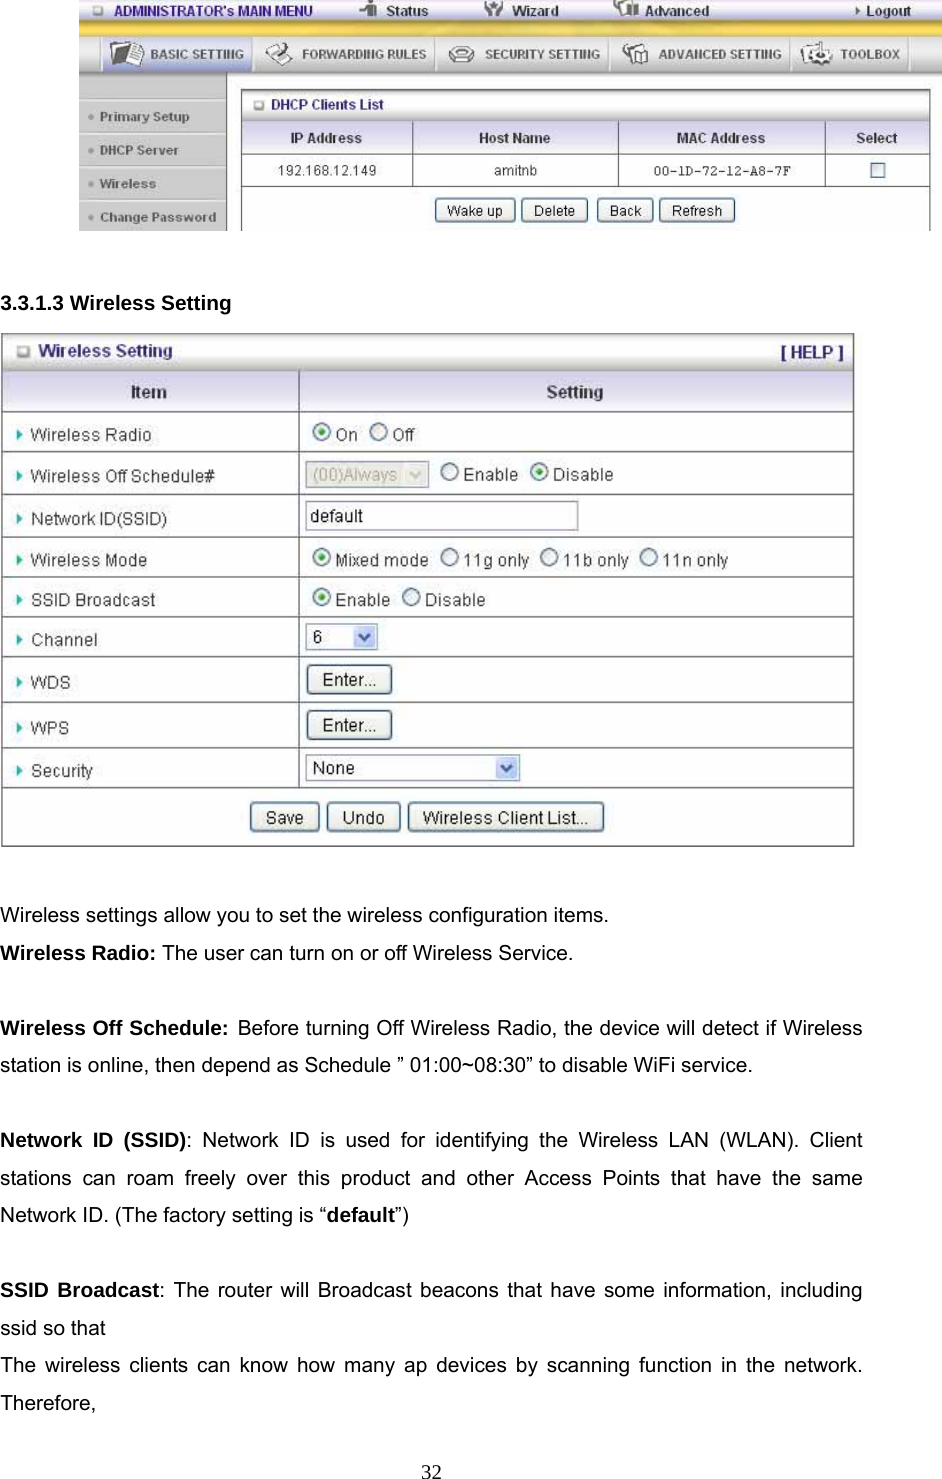  32  3.3.1.3 Wireless Setting   Wireless settings allow you to set the wireless configuration items. Wireless Radio: The user can turn on or off Wireless Service.  Wireless Off Schedule: Before turning Off Wireless Radio, the device will detect if Wireless station is online, then depend as Schedule ” 01:00~08:30” to disable WiFi service.  Network ID (SSID): Network ID is used for identifying the Wireless LAN (WLAN). Client stations can roam freely over this product and other Access Points that have the same Network ID. (The factory setting is “default”)  SSID Broadcast: The router will Broadcast beacons that have some information, including ssid so that   The wireless clients can know how many ap devices by scanning function in the network. Therefore, 